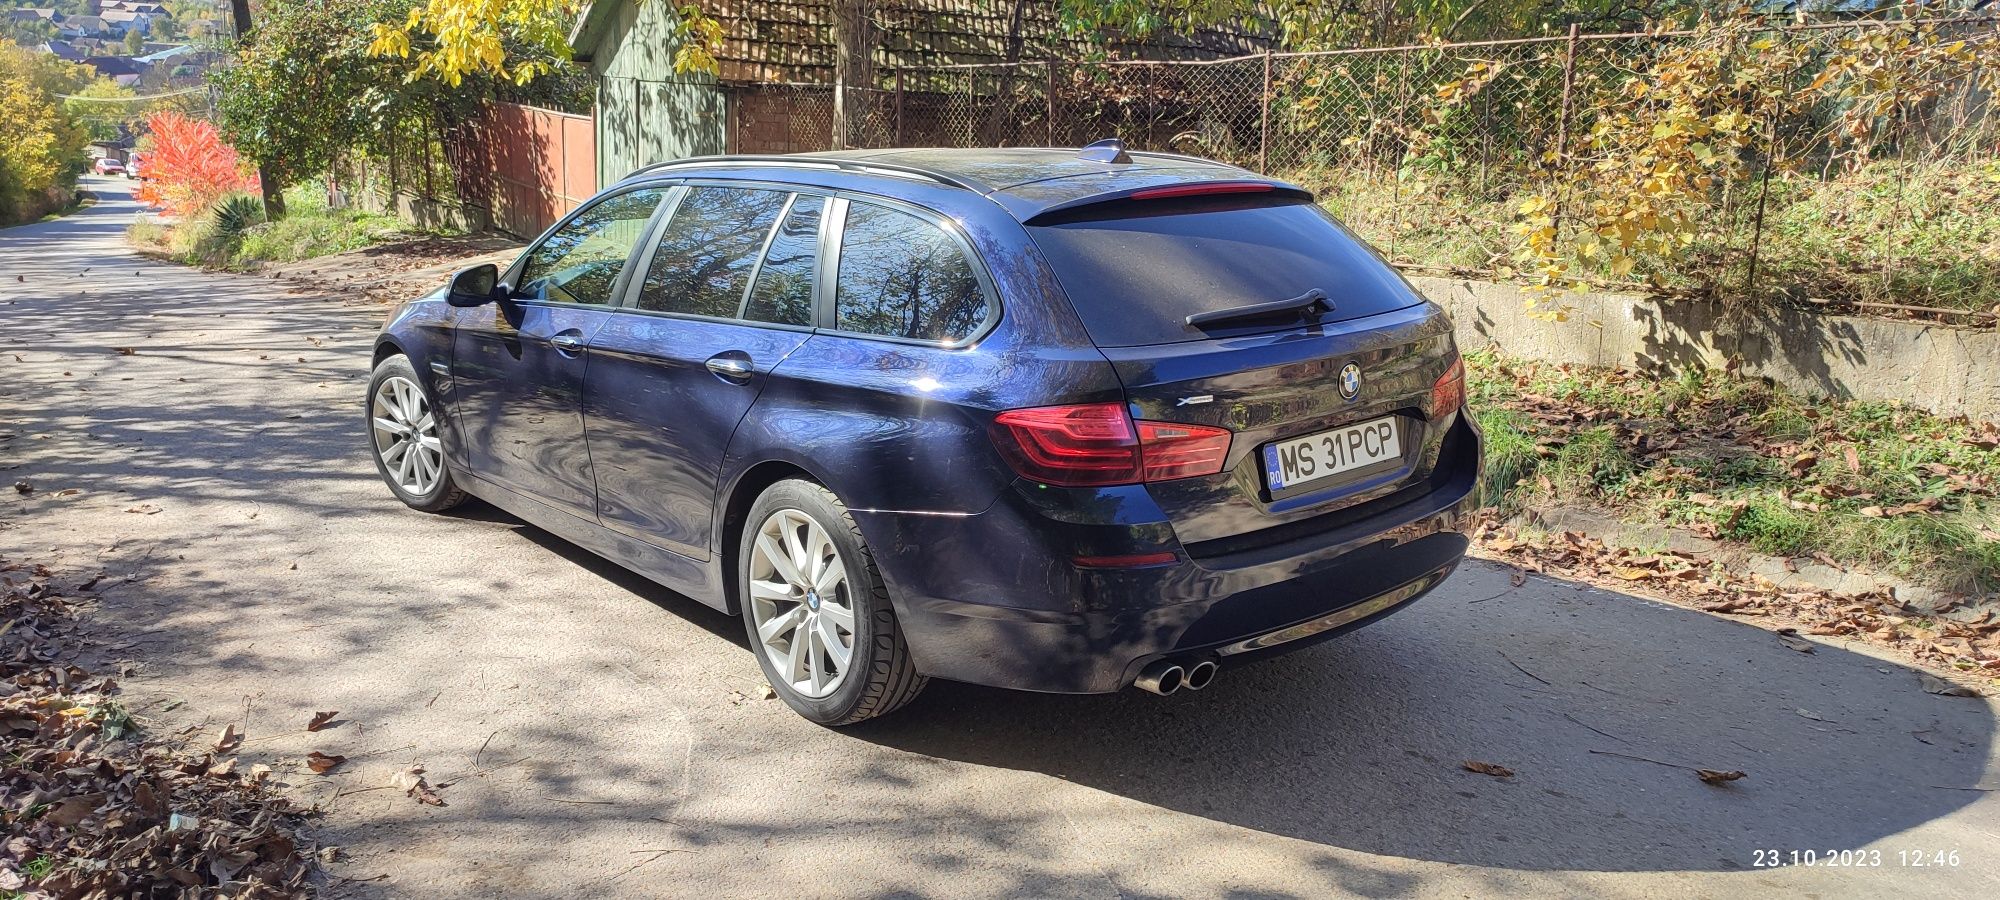 BMW 520dXdrive Facelift